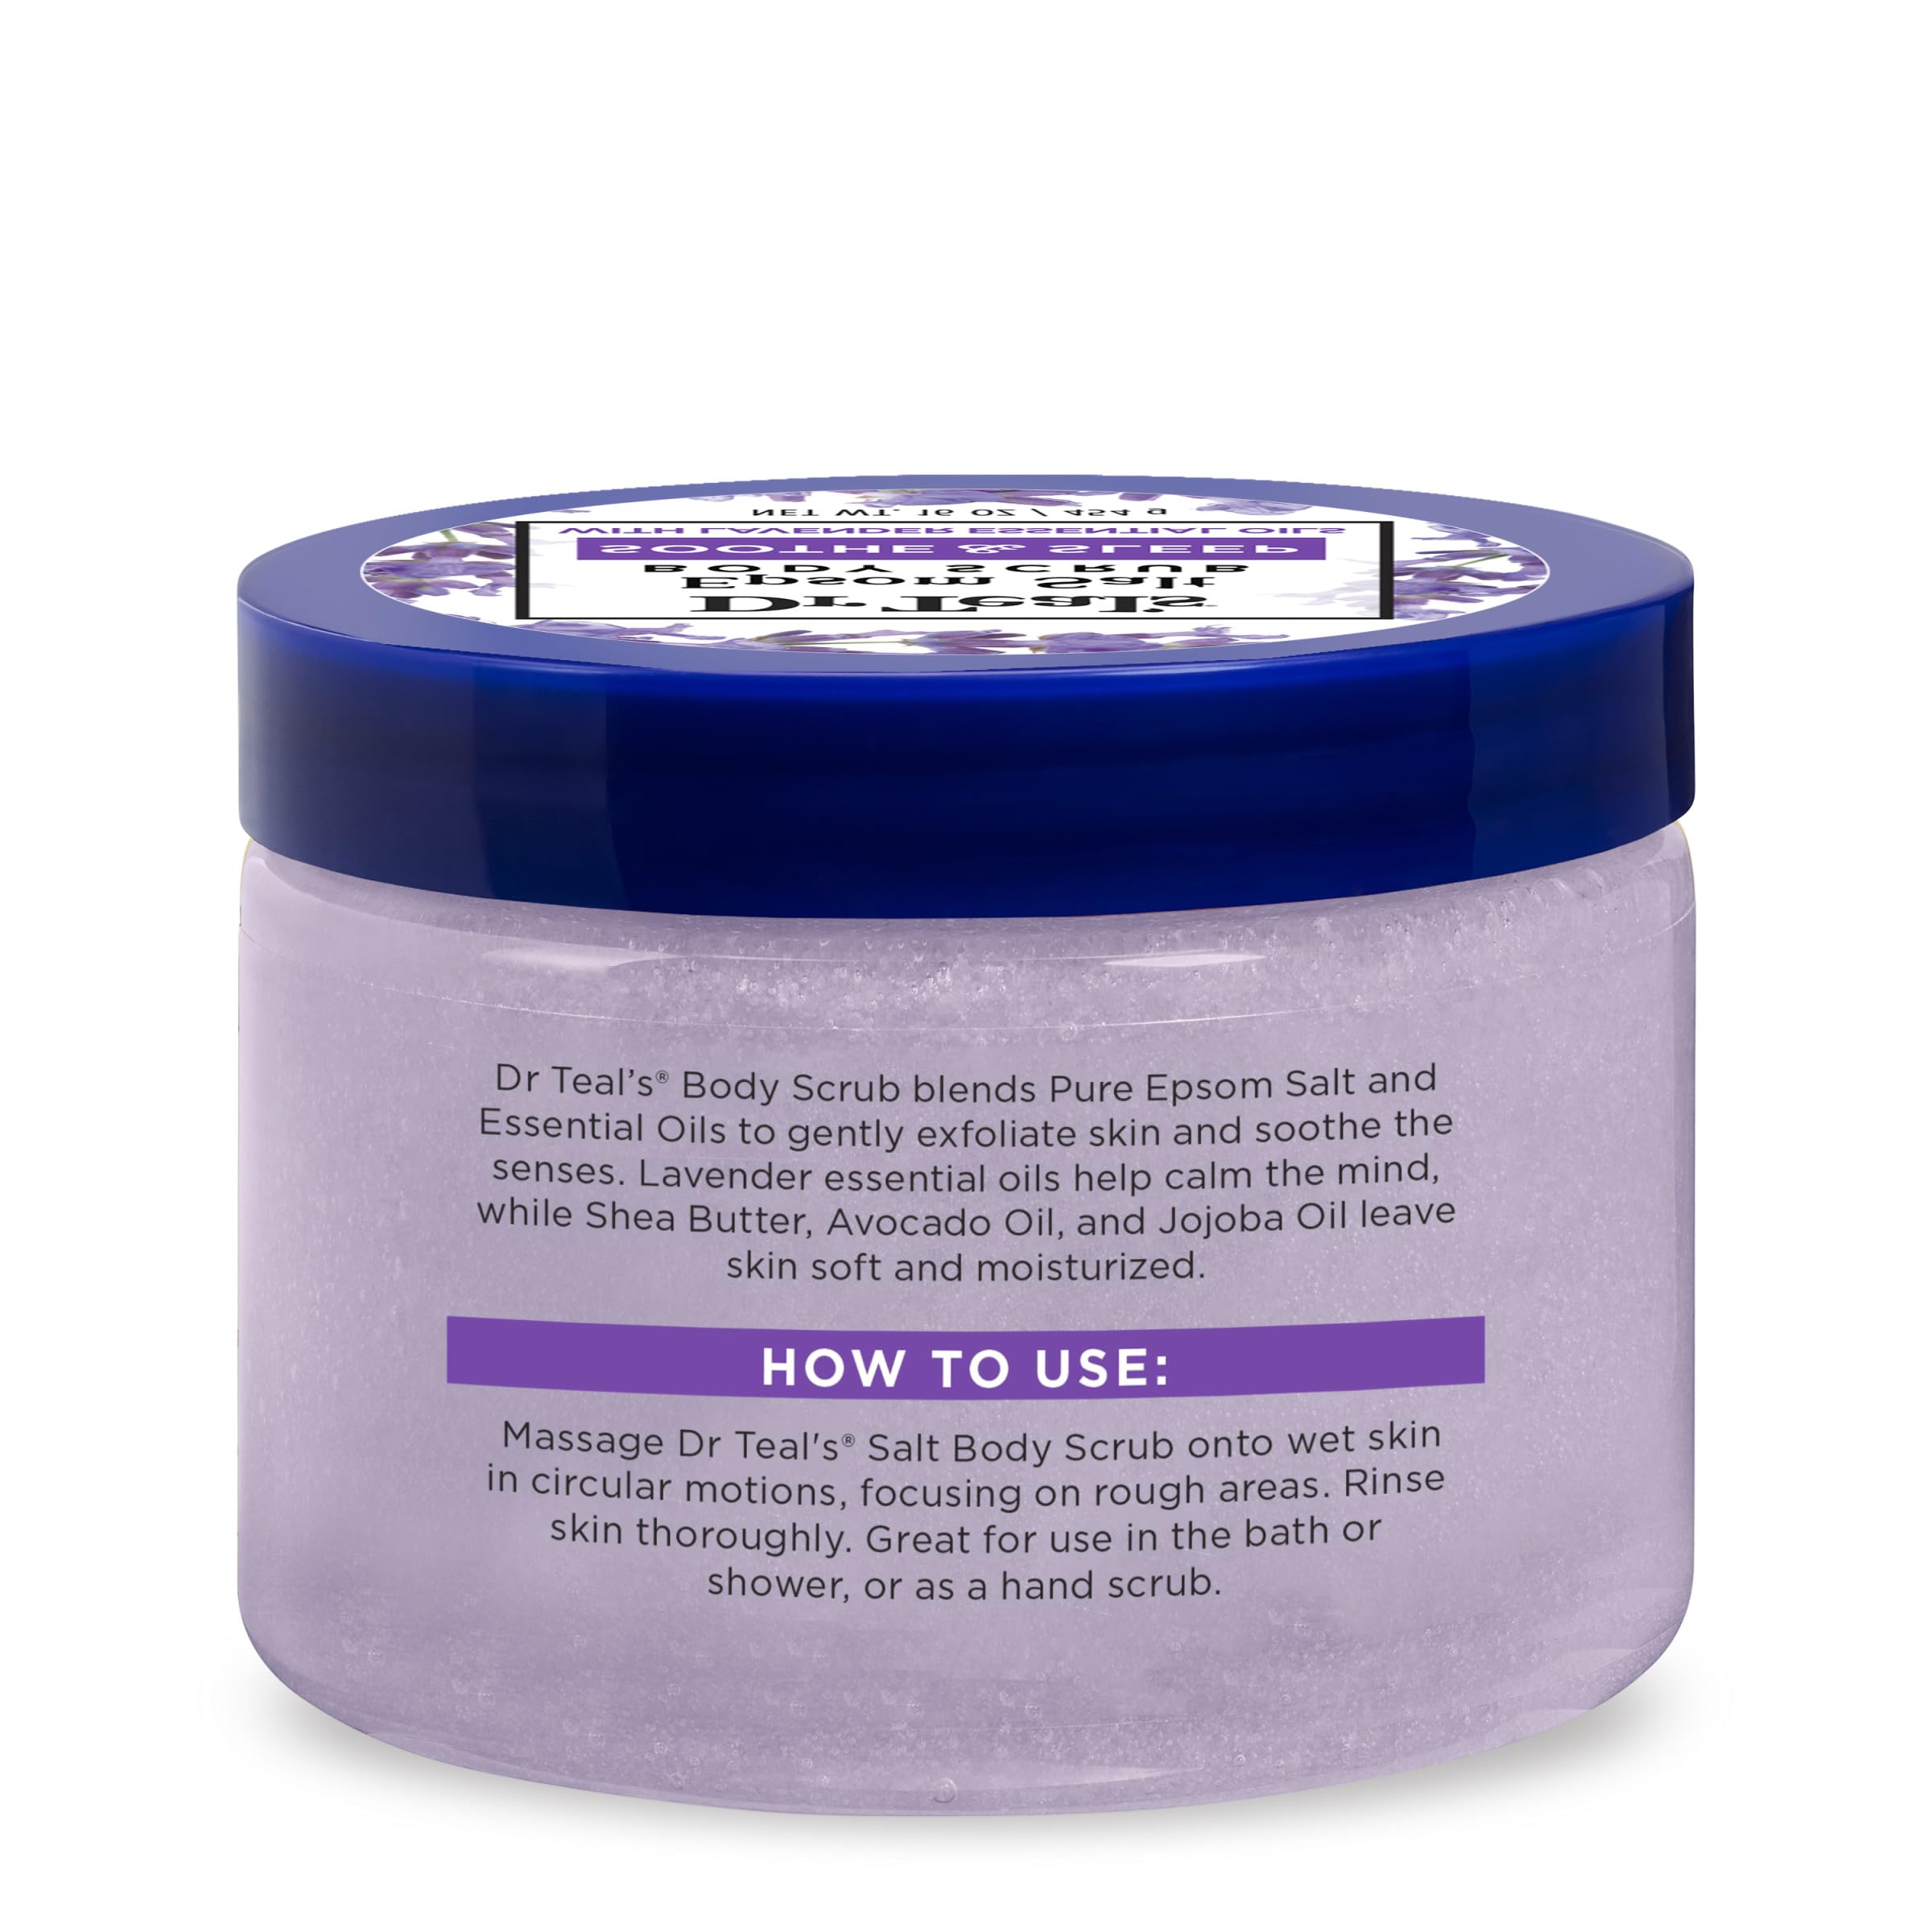 Dr Teal's Pure Epsom Salt Body Scrub, Soothe & Sleep with Lavender Essential Oils, 16 oz (Pack of 3) (Packaging May Vary)